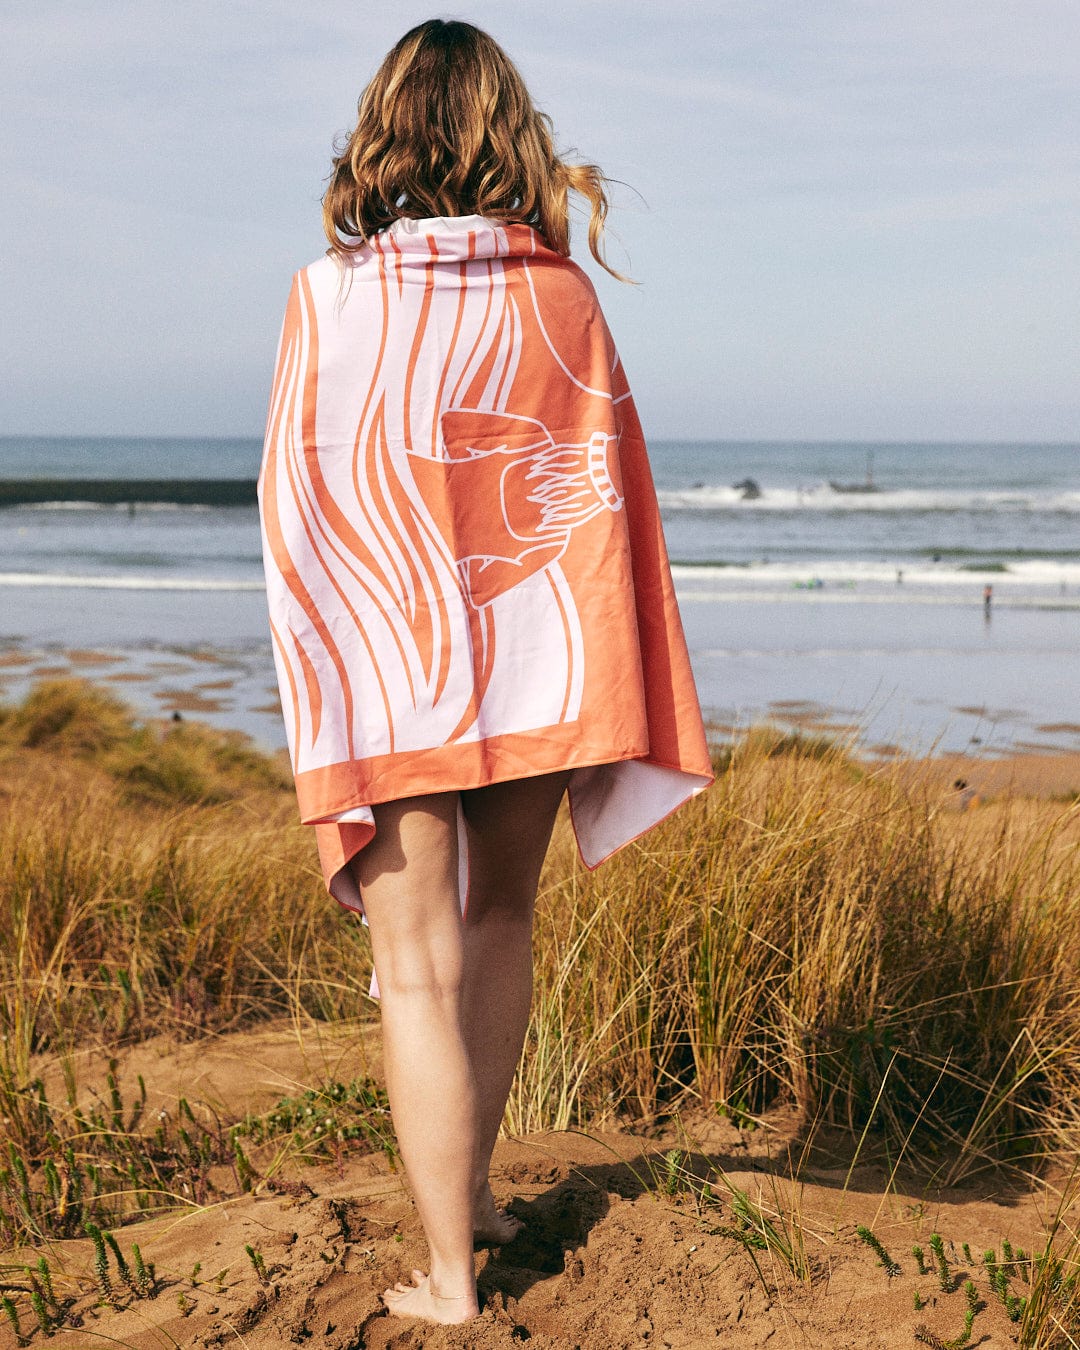 Woman draped in a Saltrock Cold Water Club Microfibre Towel in Orange and White stripes stands on a sandy beach, overlooking the ocean with surfers in the distance.